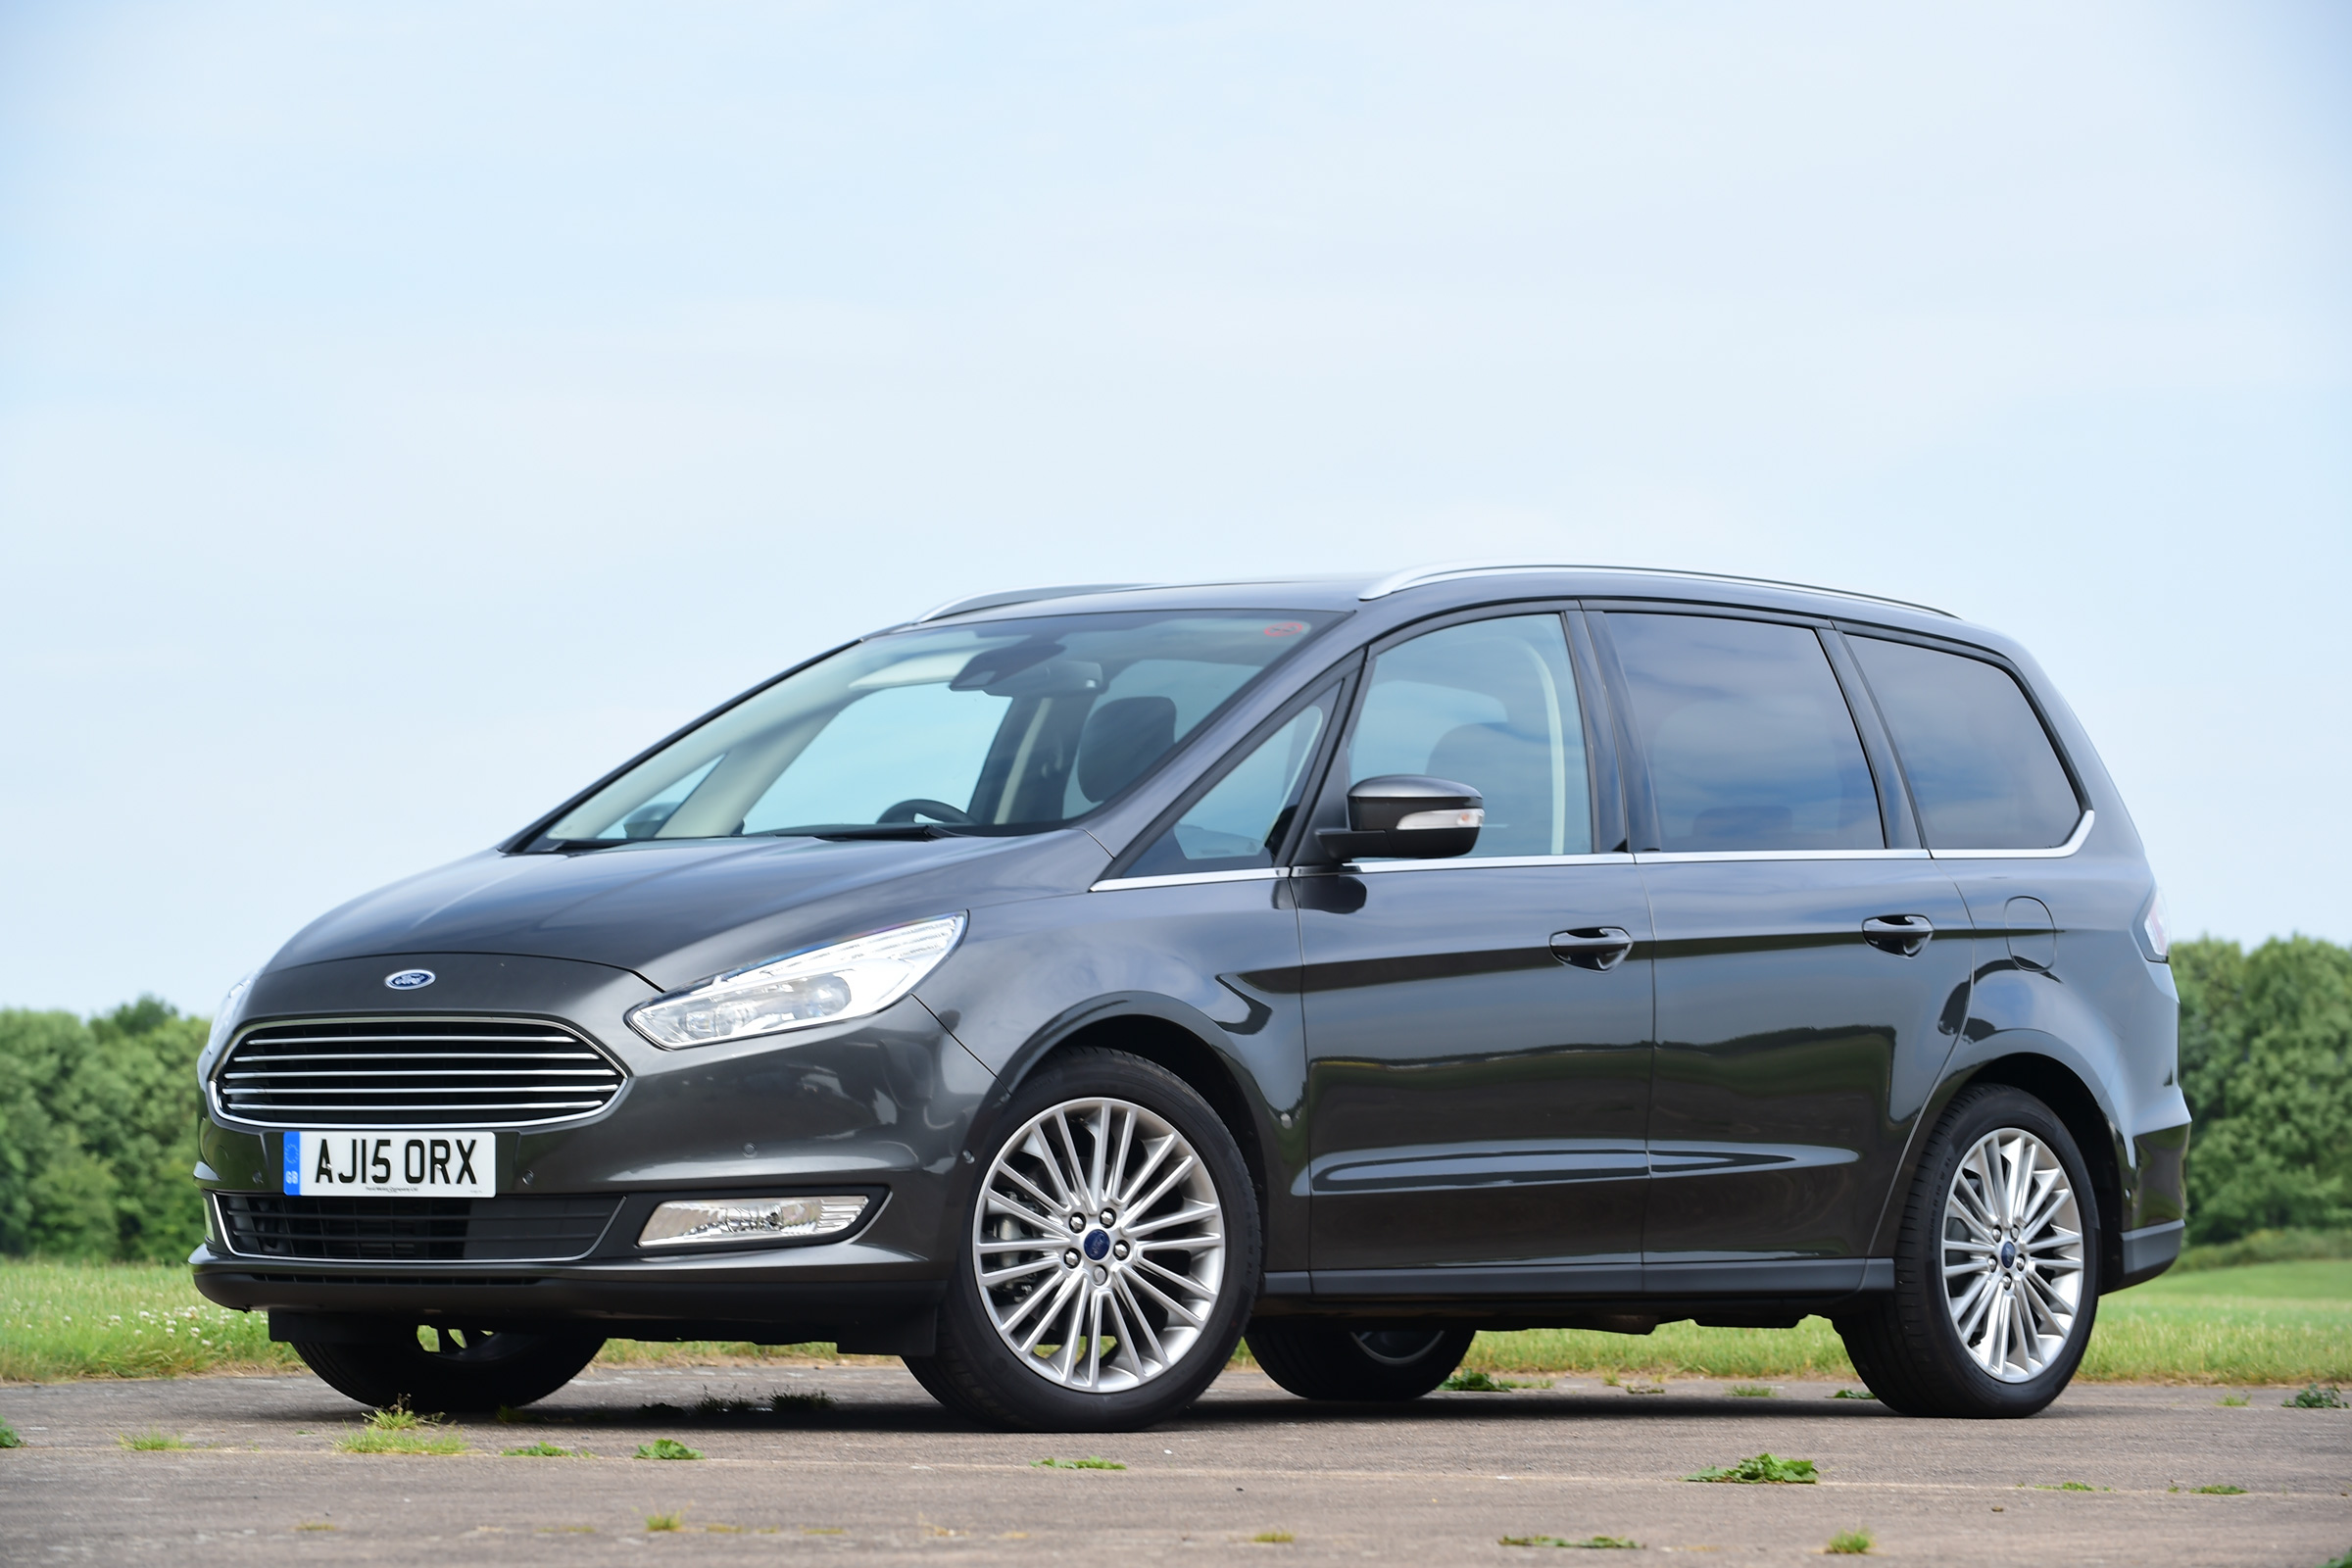 https://mediacloud.carbuyer.co.uk/image/private/s--SlJetPji--/v1579624773/carbuyer/ford-galaxy-mpv-fromt-quarter.jpg